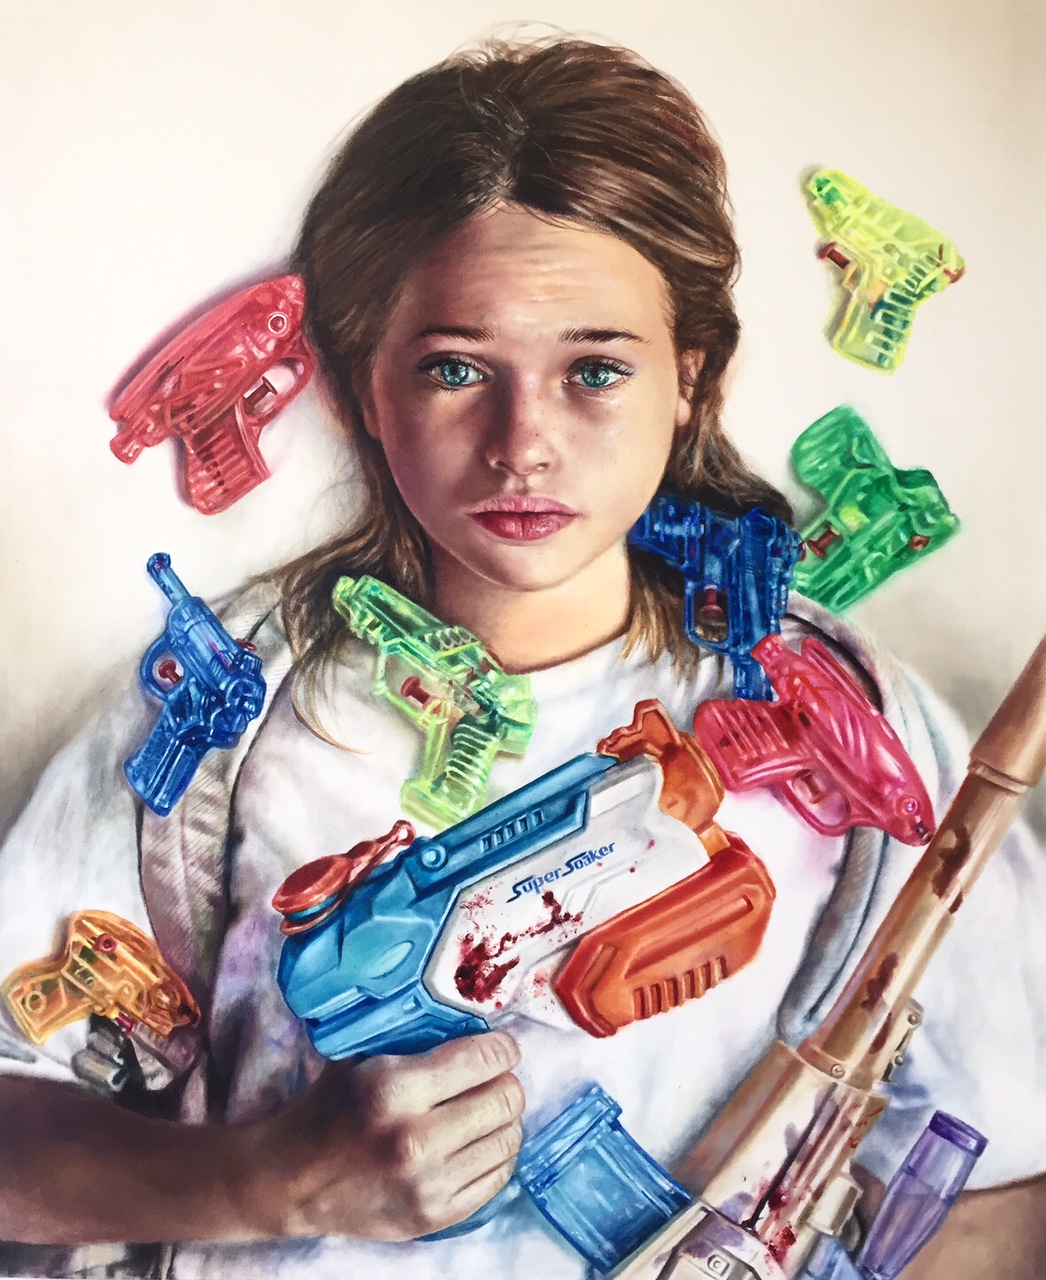 Toy Guns 2017 Saatchi gallery, private collector